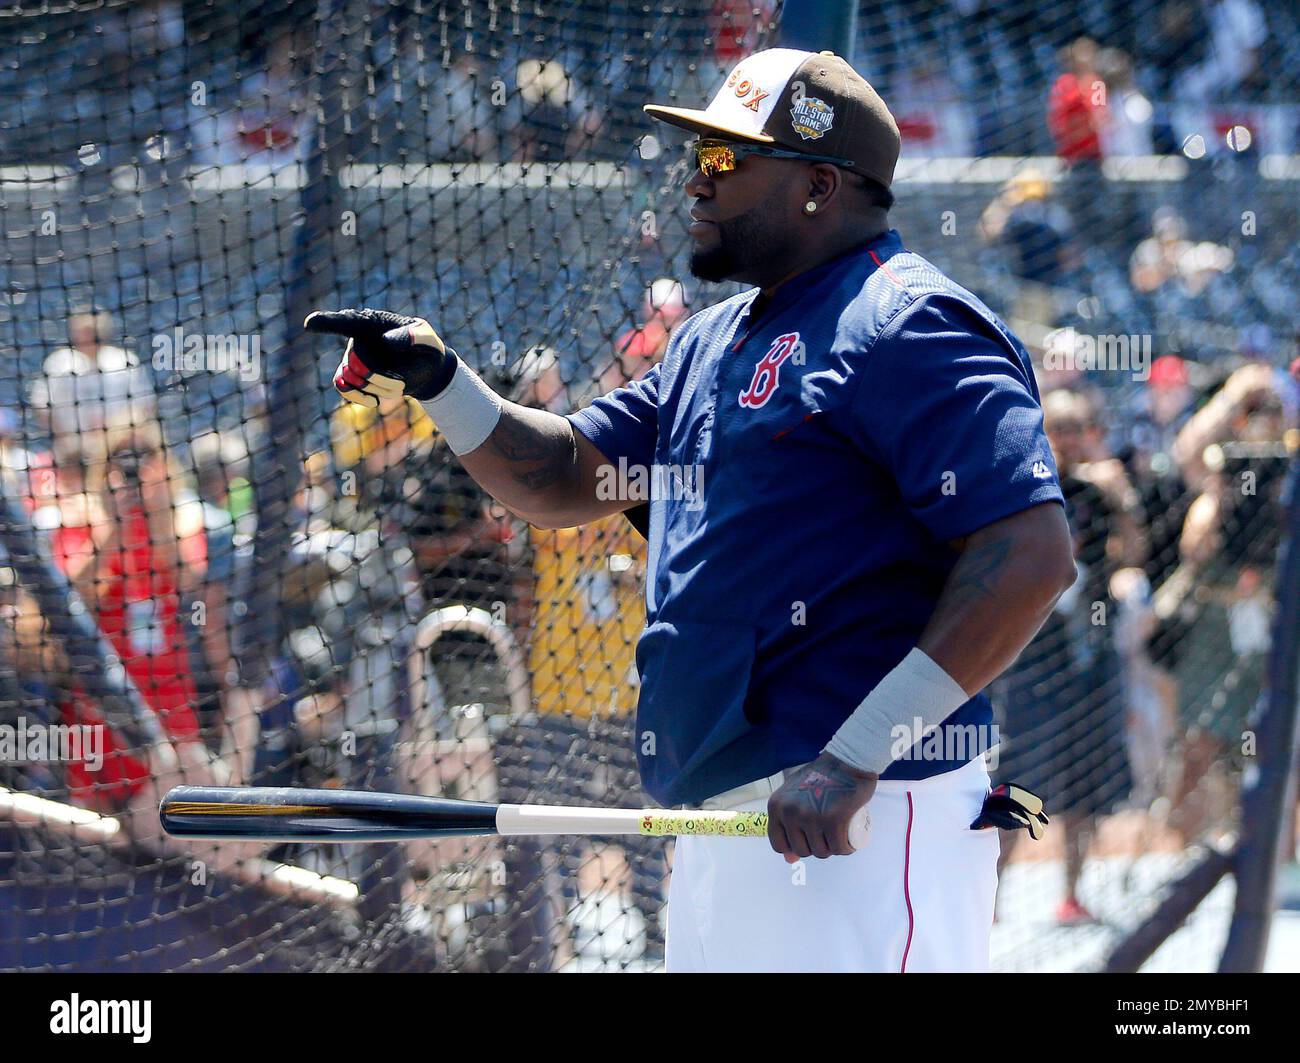 American League's David Ortiz, of the Boston Red Sox, prepares to hit  during batting practice prior to the MLB baseball All-Star Game, Tuesday,  July 12, 2016, in San Diego. (AP Photo/Lenny Ignelzi